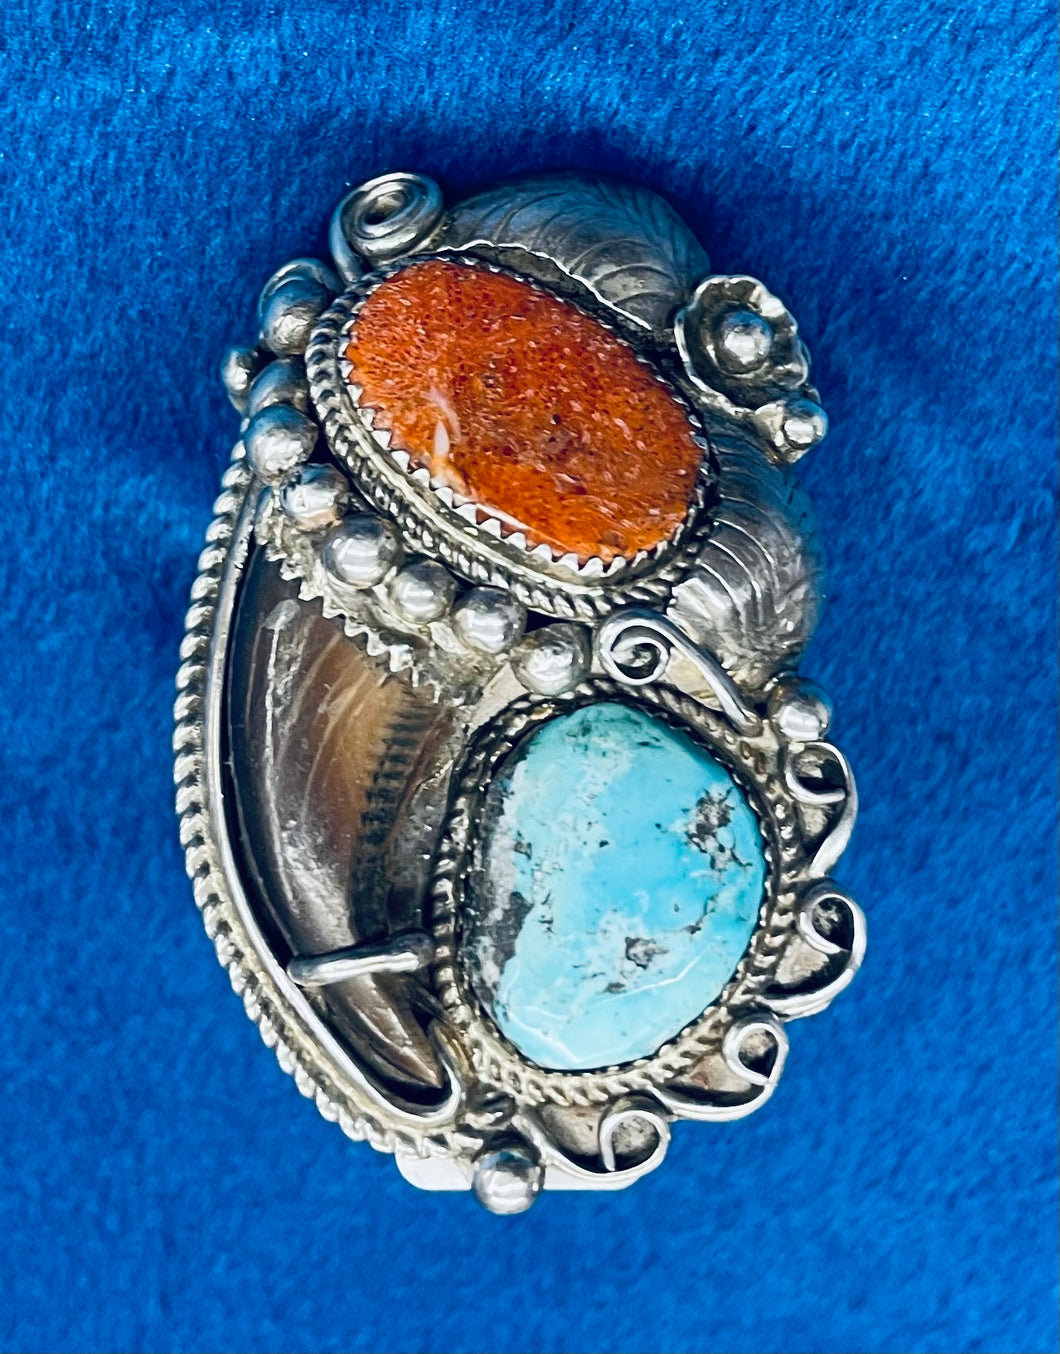 Bear Claw Ring with Turquoise and Coral Stones